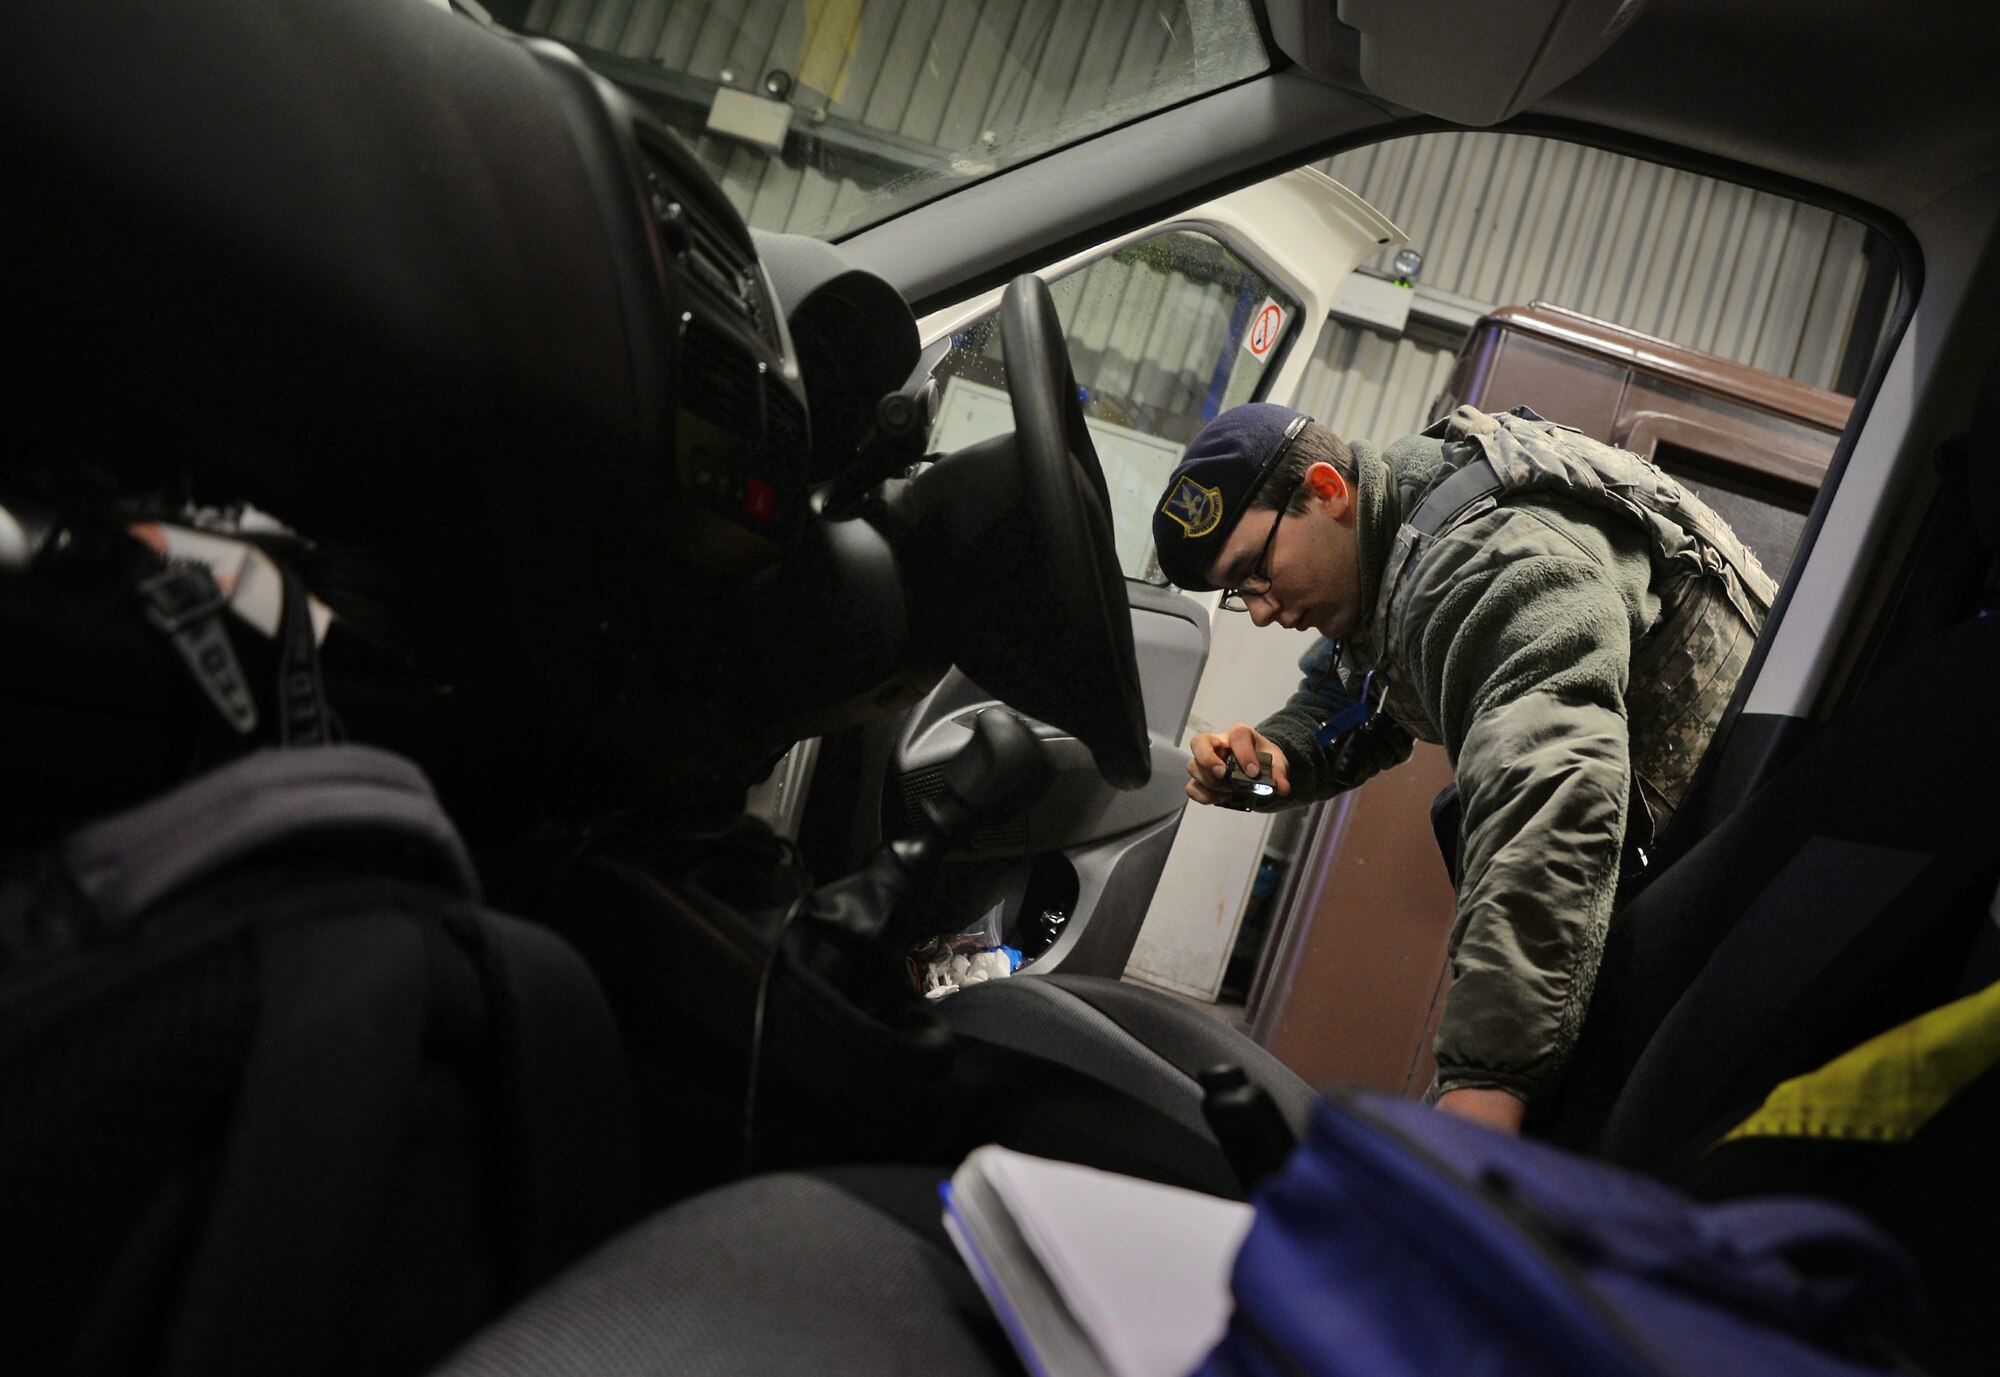 U.S. Air Force Airman Ryan Griffith, 100th Security Forces Squadron response force leader, inspects a vehicle Dec. 15, 2015, at the search barn on RAF Mildenhall, England. Both an armed Airman and a Ministry of Defence Guard Service civilian security officer are required to be in attendance during a vehicle inspection. (U.S. Air Force photo by Senior Airman Christine Halan/Released)